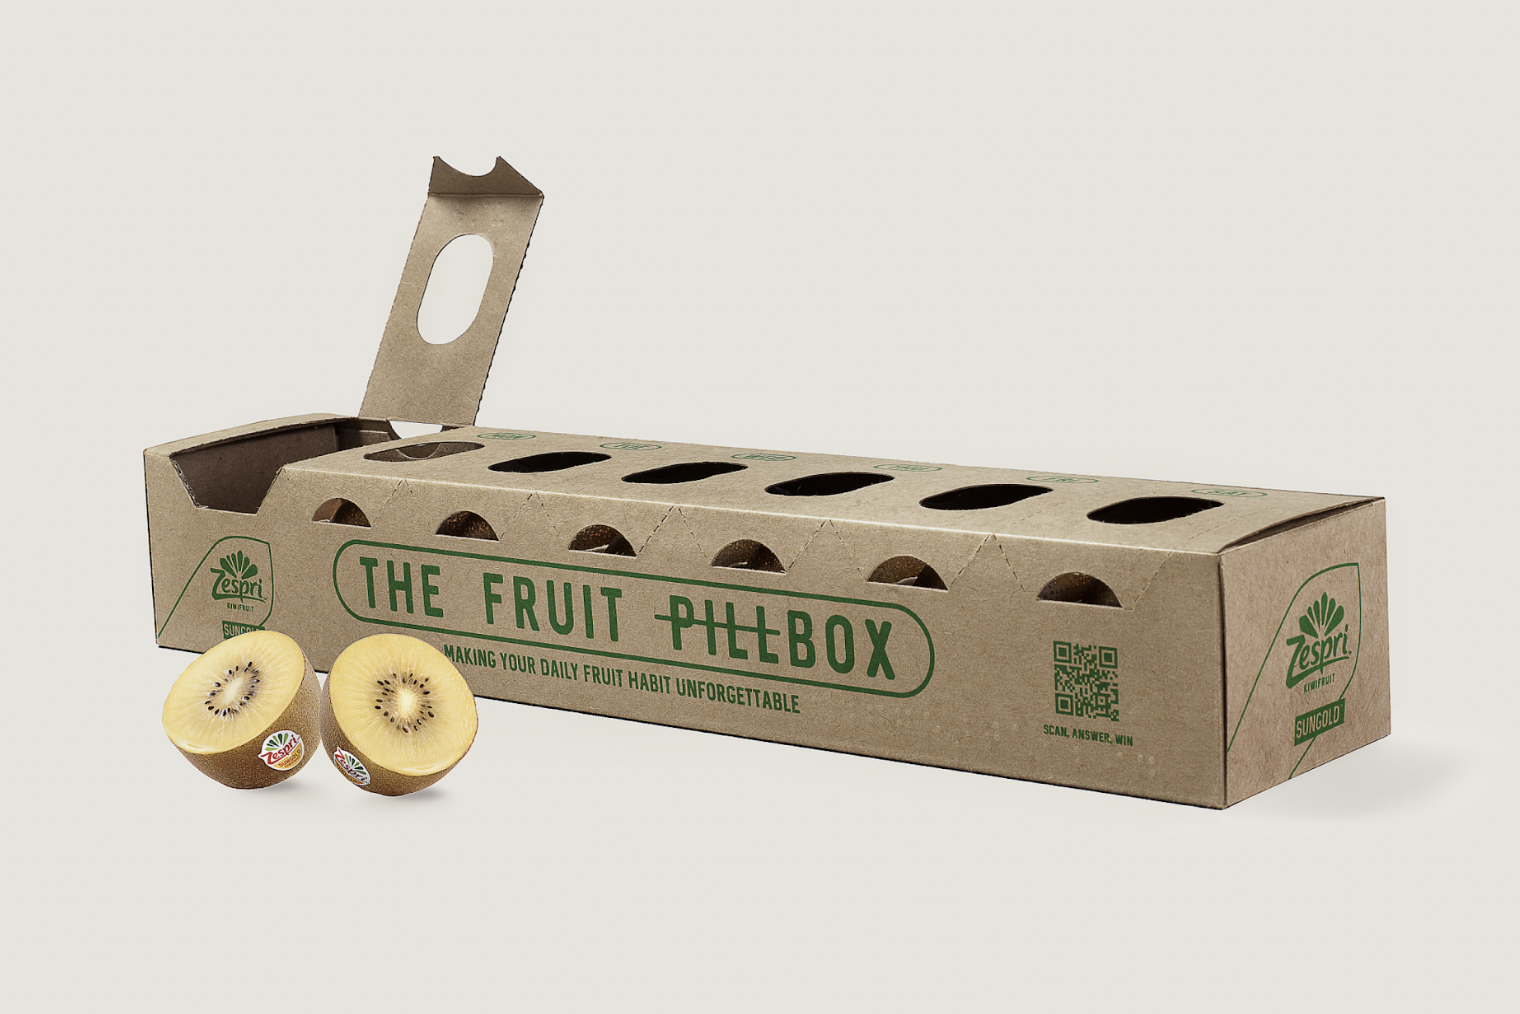 Eco-friendly cardboard fruit packaging box labeled "The Fruit Pilebox" with two halves of a kiwi fruit in front.